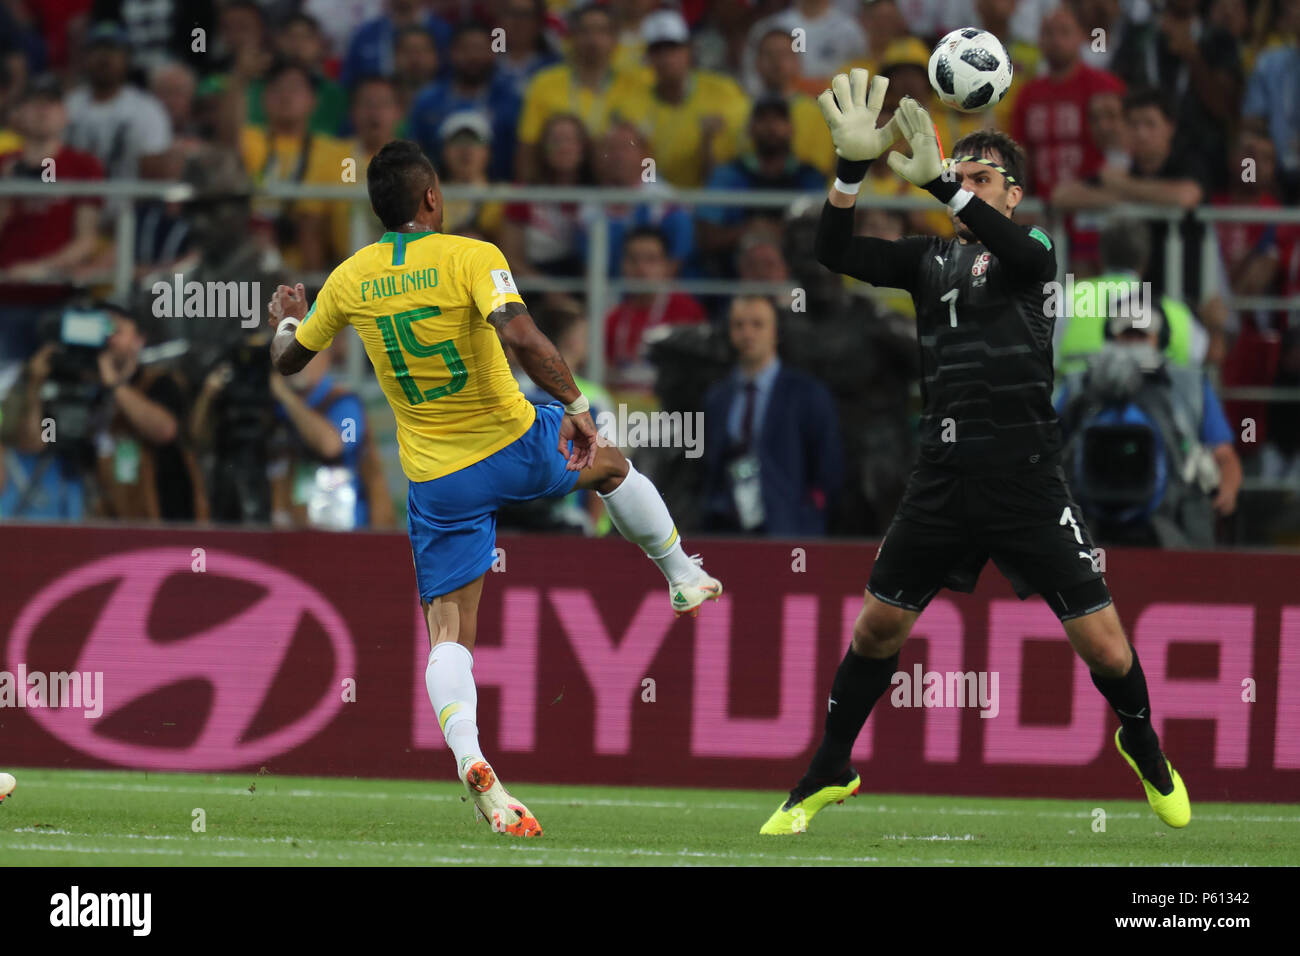 Paulinho & Vladimir Stojkovic SERBIA V BRAZIL SERBIA V BRAZIL, 2018 FIFA WORLD CUP RUSSIA 27 June 2018 GBC8905 2018 FIFA World Cup Russia Spartak Stadium Moscow STRICTLY EDITORIAL USE ONLY. If The Player/Players Depicted In This Image Is/Are Playing For An English Club Or The England National Team. Then This Image May Only Be Used For Editorial Purposes. No Commercial Use. The Following Usages Are Also Restricted EVEN IF IN AN EDITORIAL CONTEXT: Use in conjuction with, or part of, any unauthorized audio, video, data, fixture lists, club/league logos, Betting, Games or any 'li Stock Photo